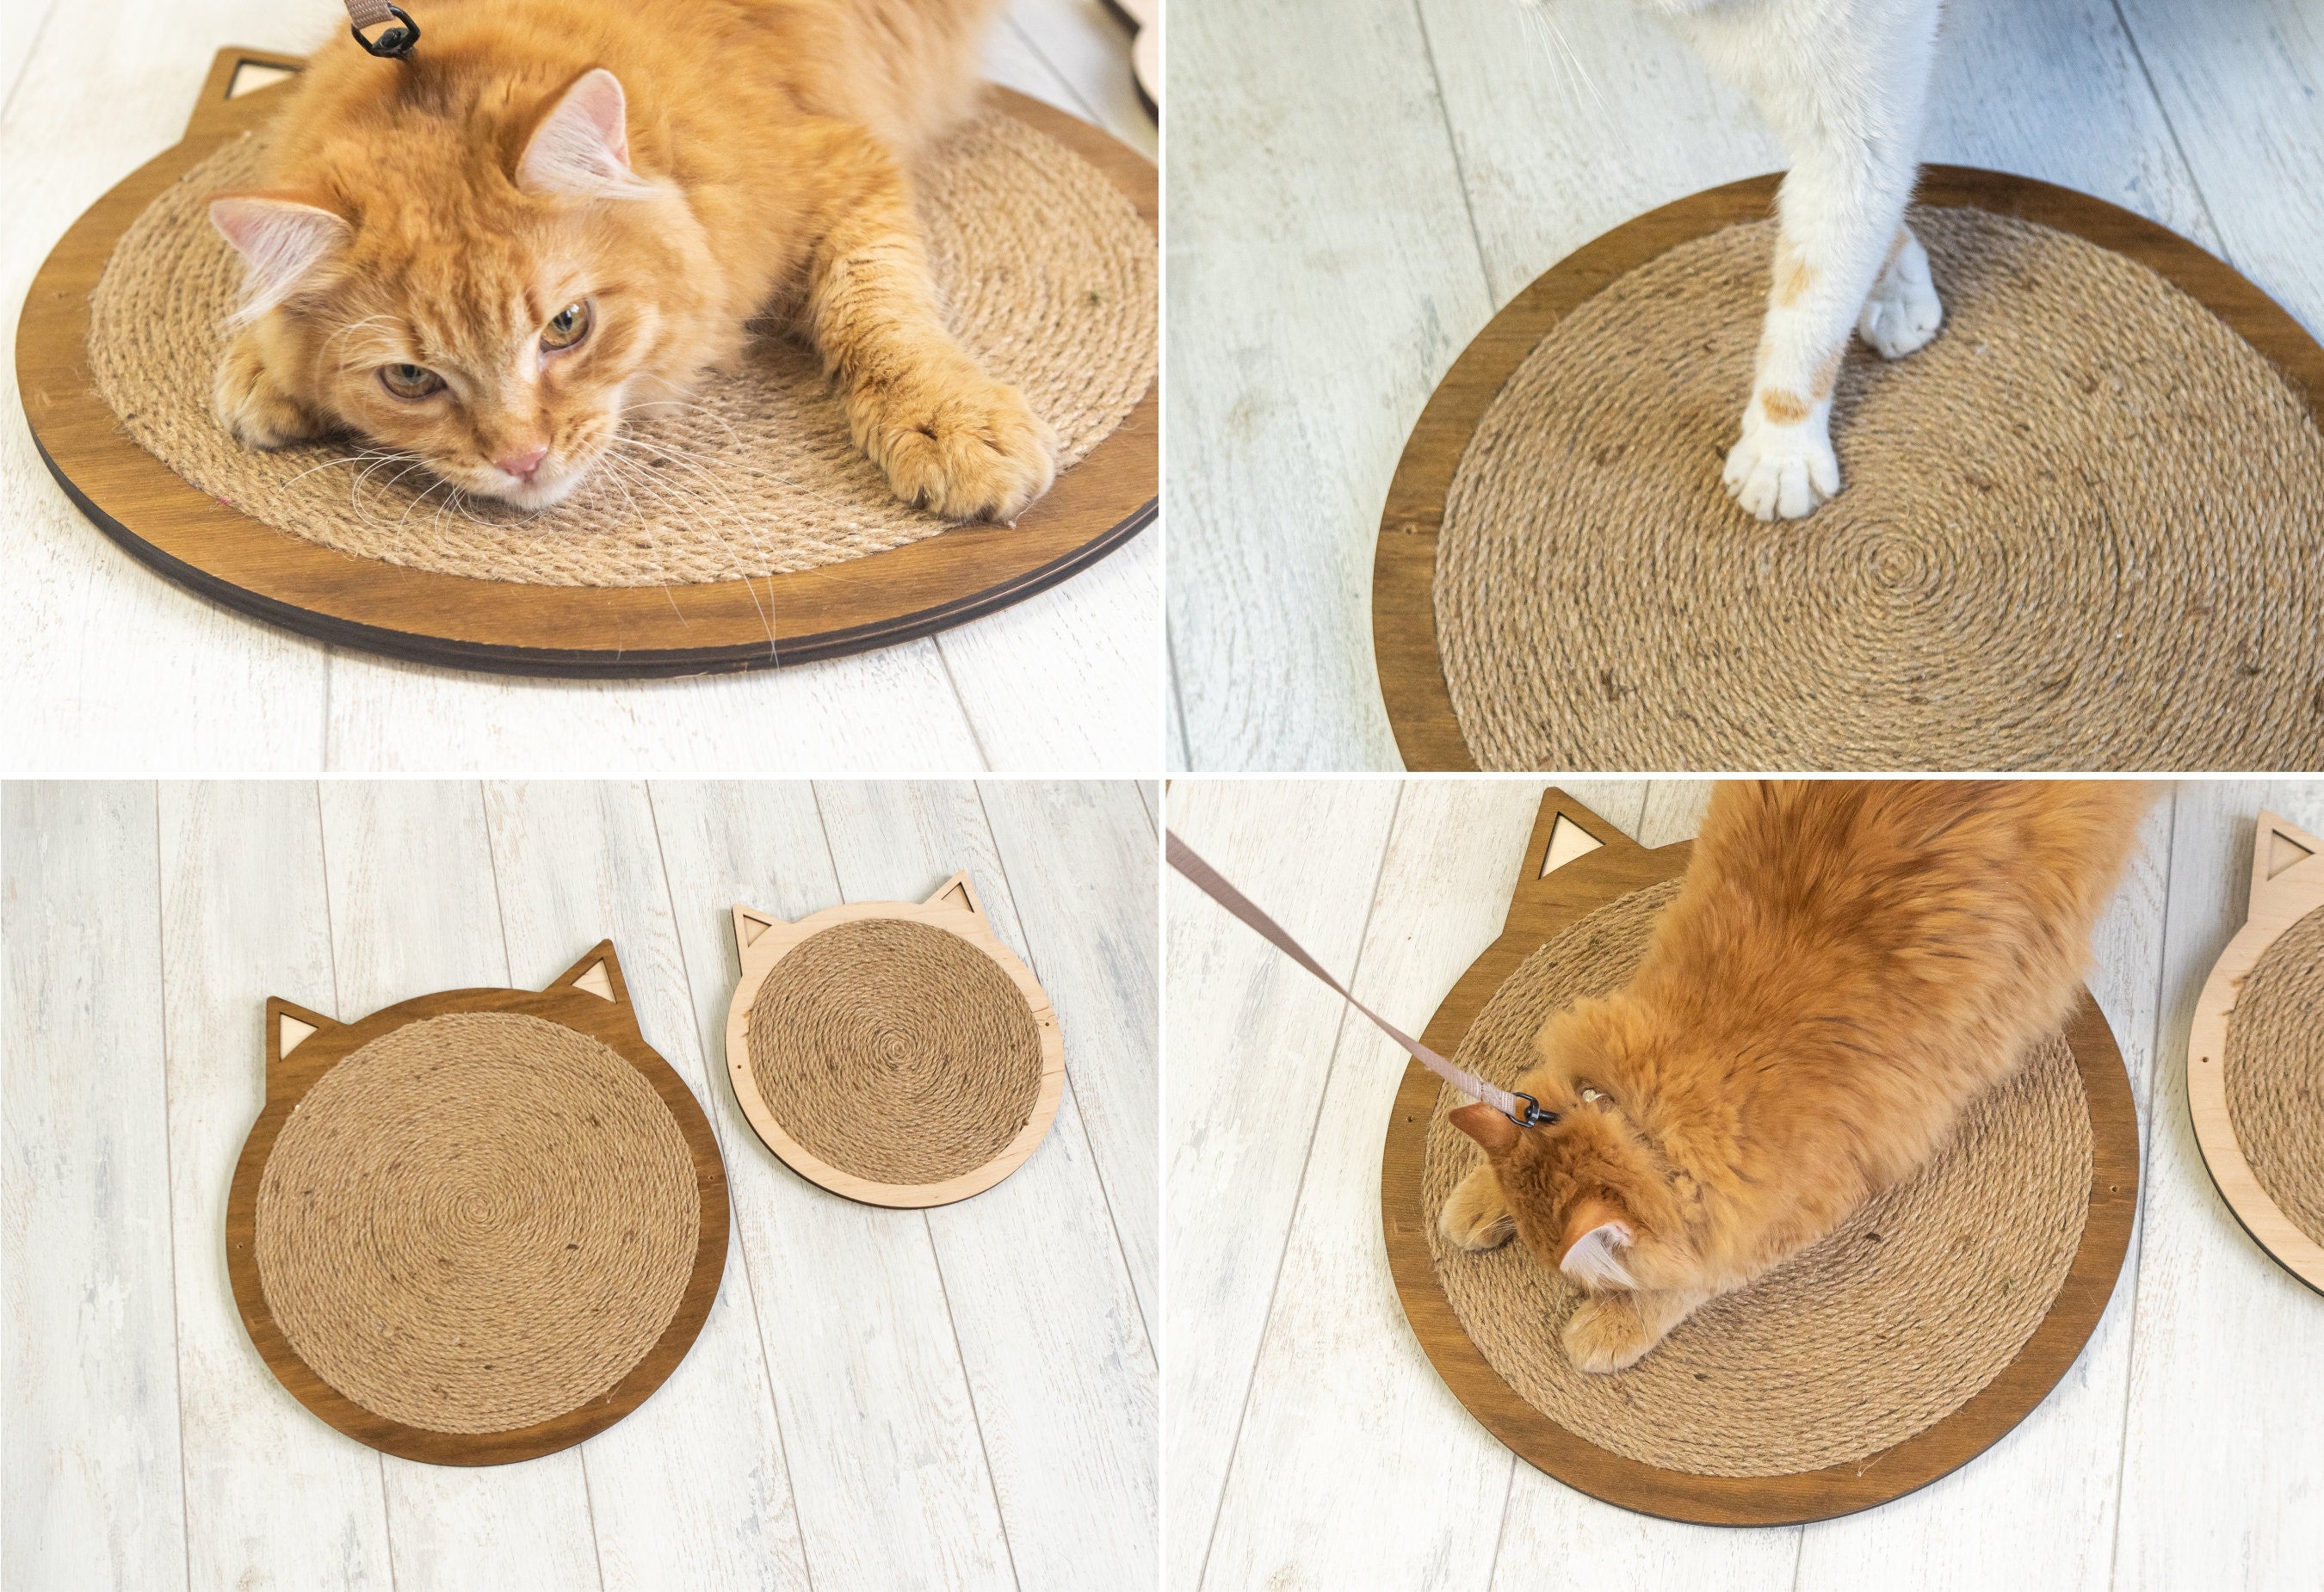 Beautiful and Stylish Scratching Post scratch Pad in Walnut Color With  Extra Cardboard Insert From Purrfur 